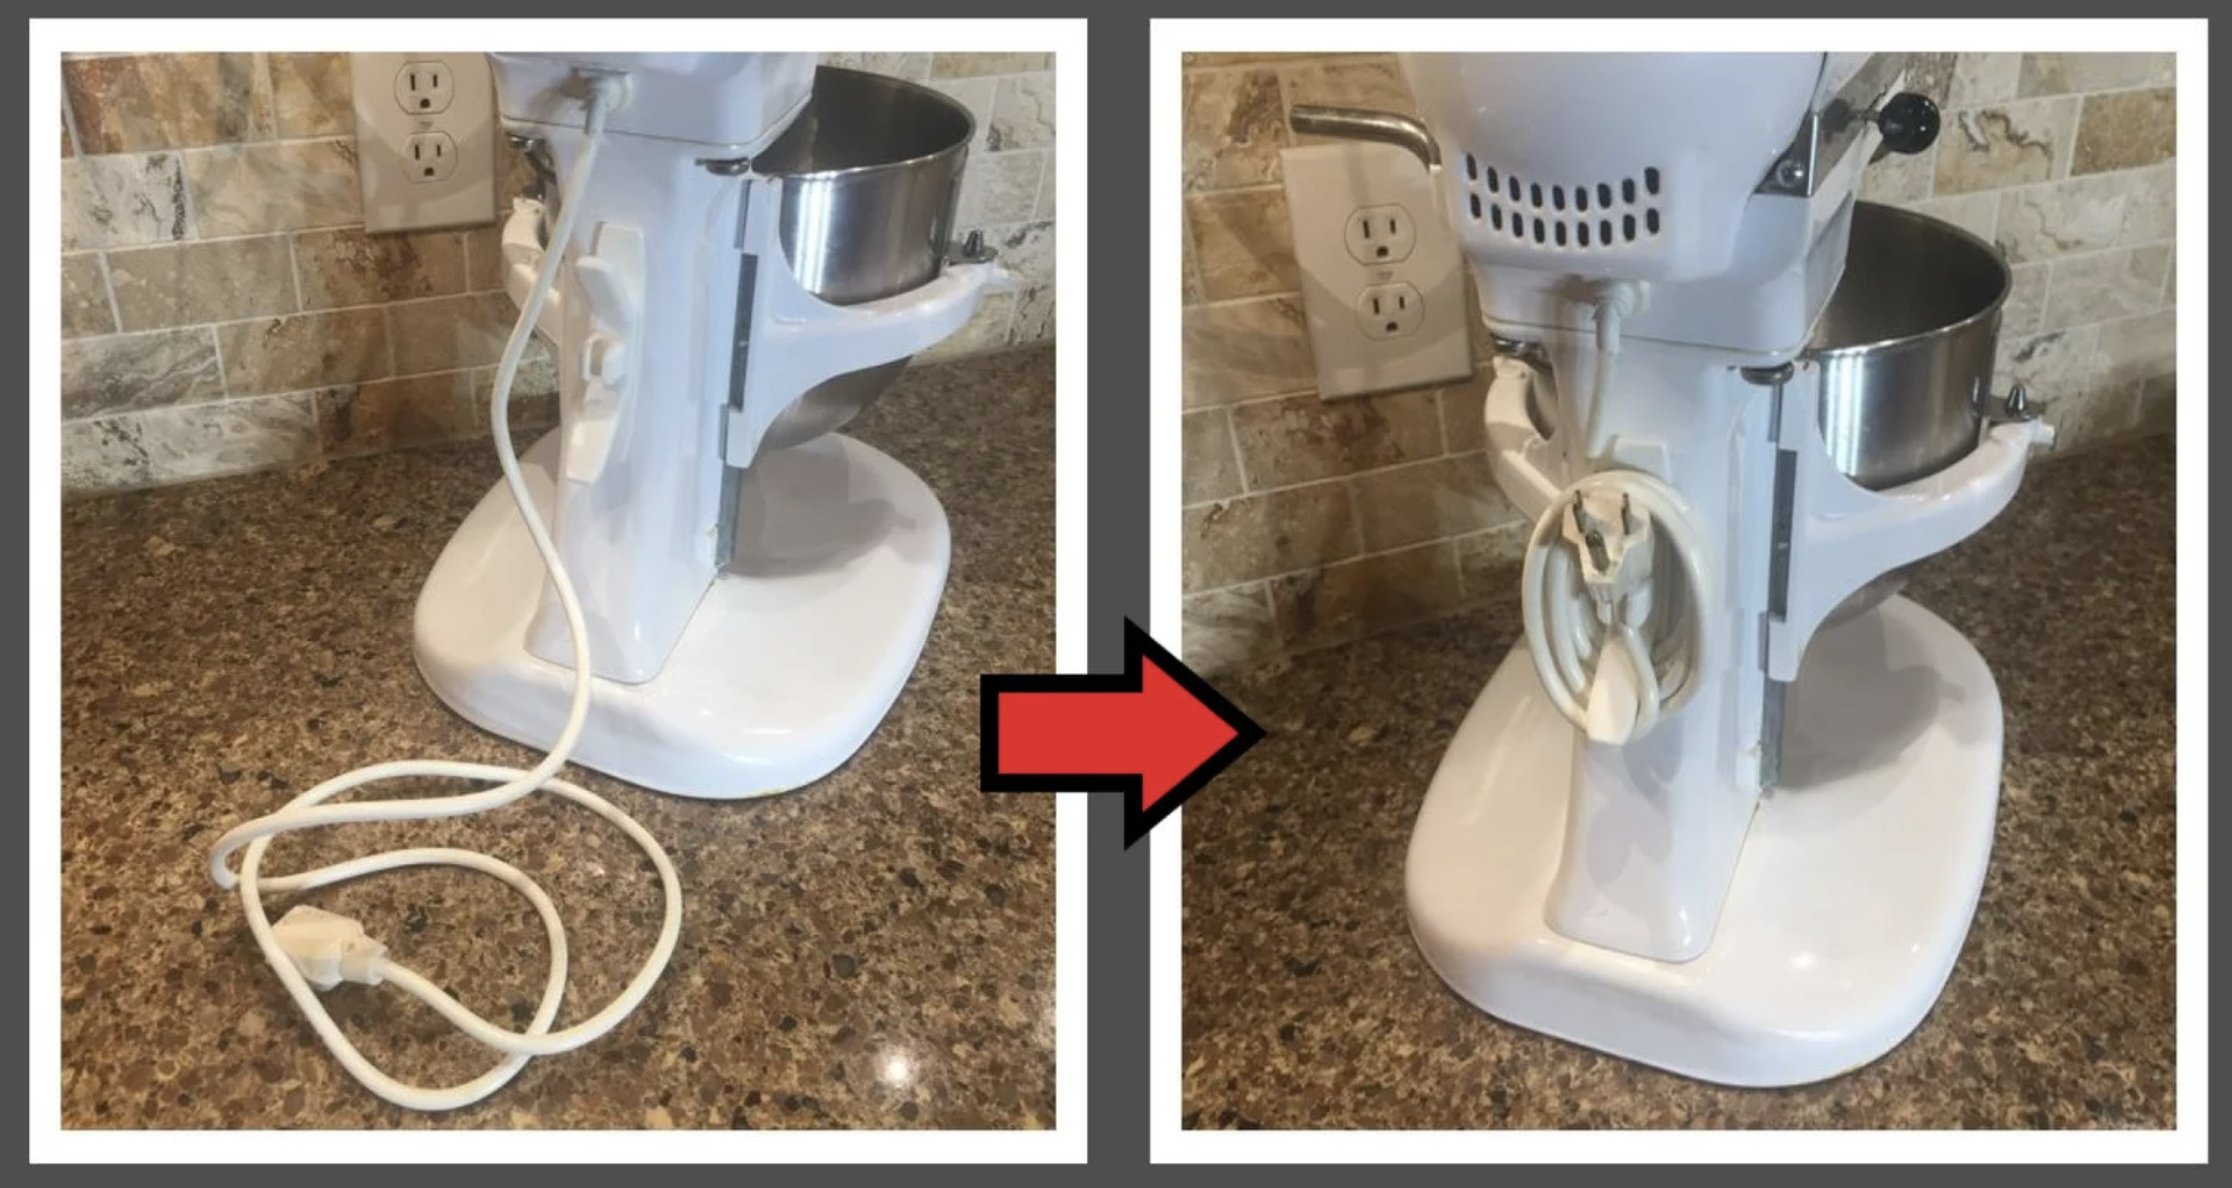 A before and after picture of the chord from a kitchen mixer